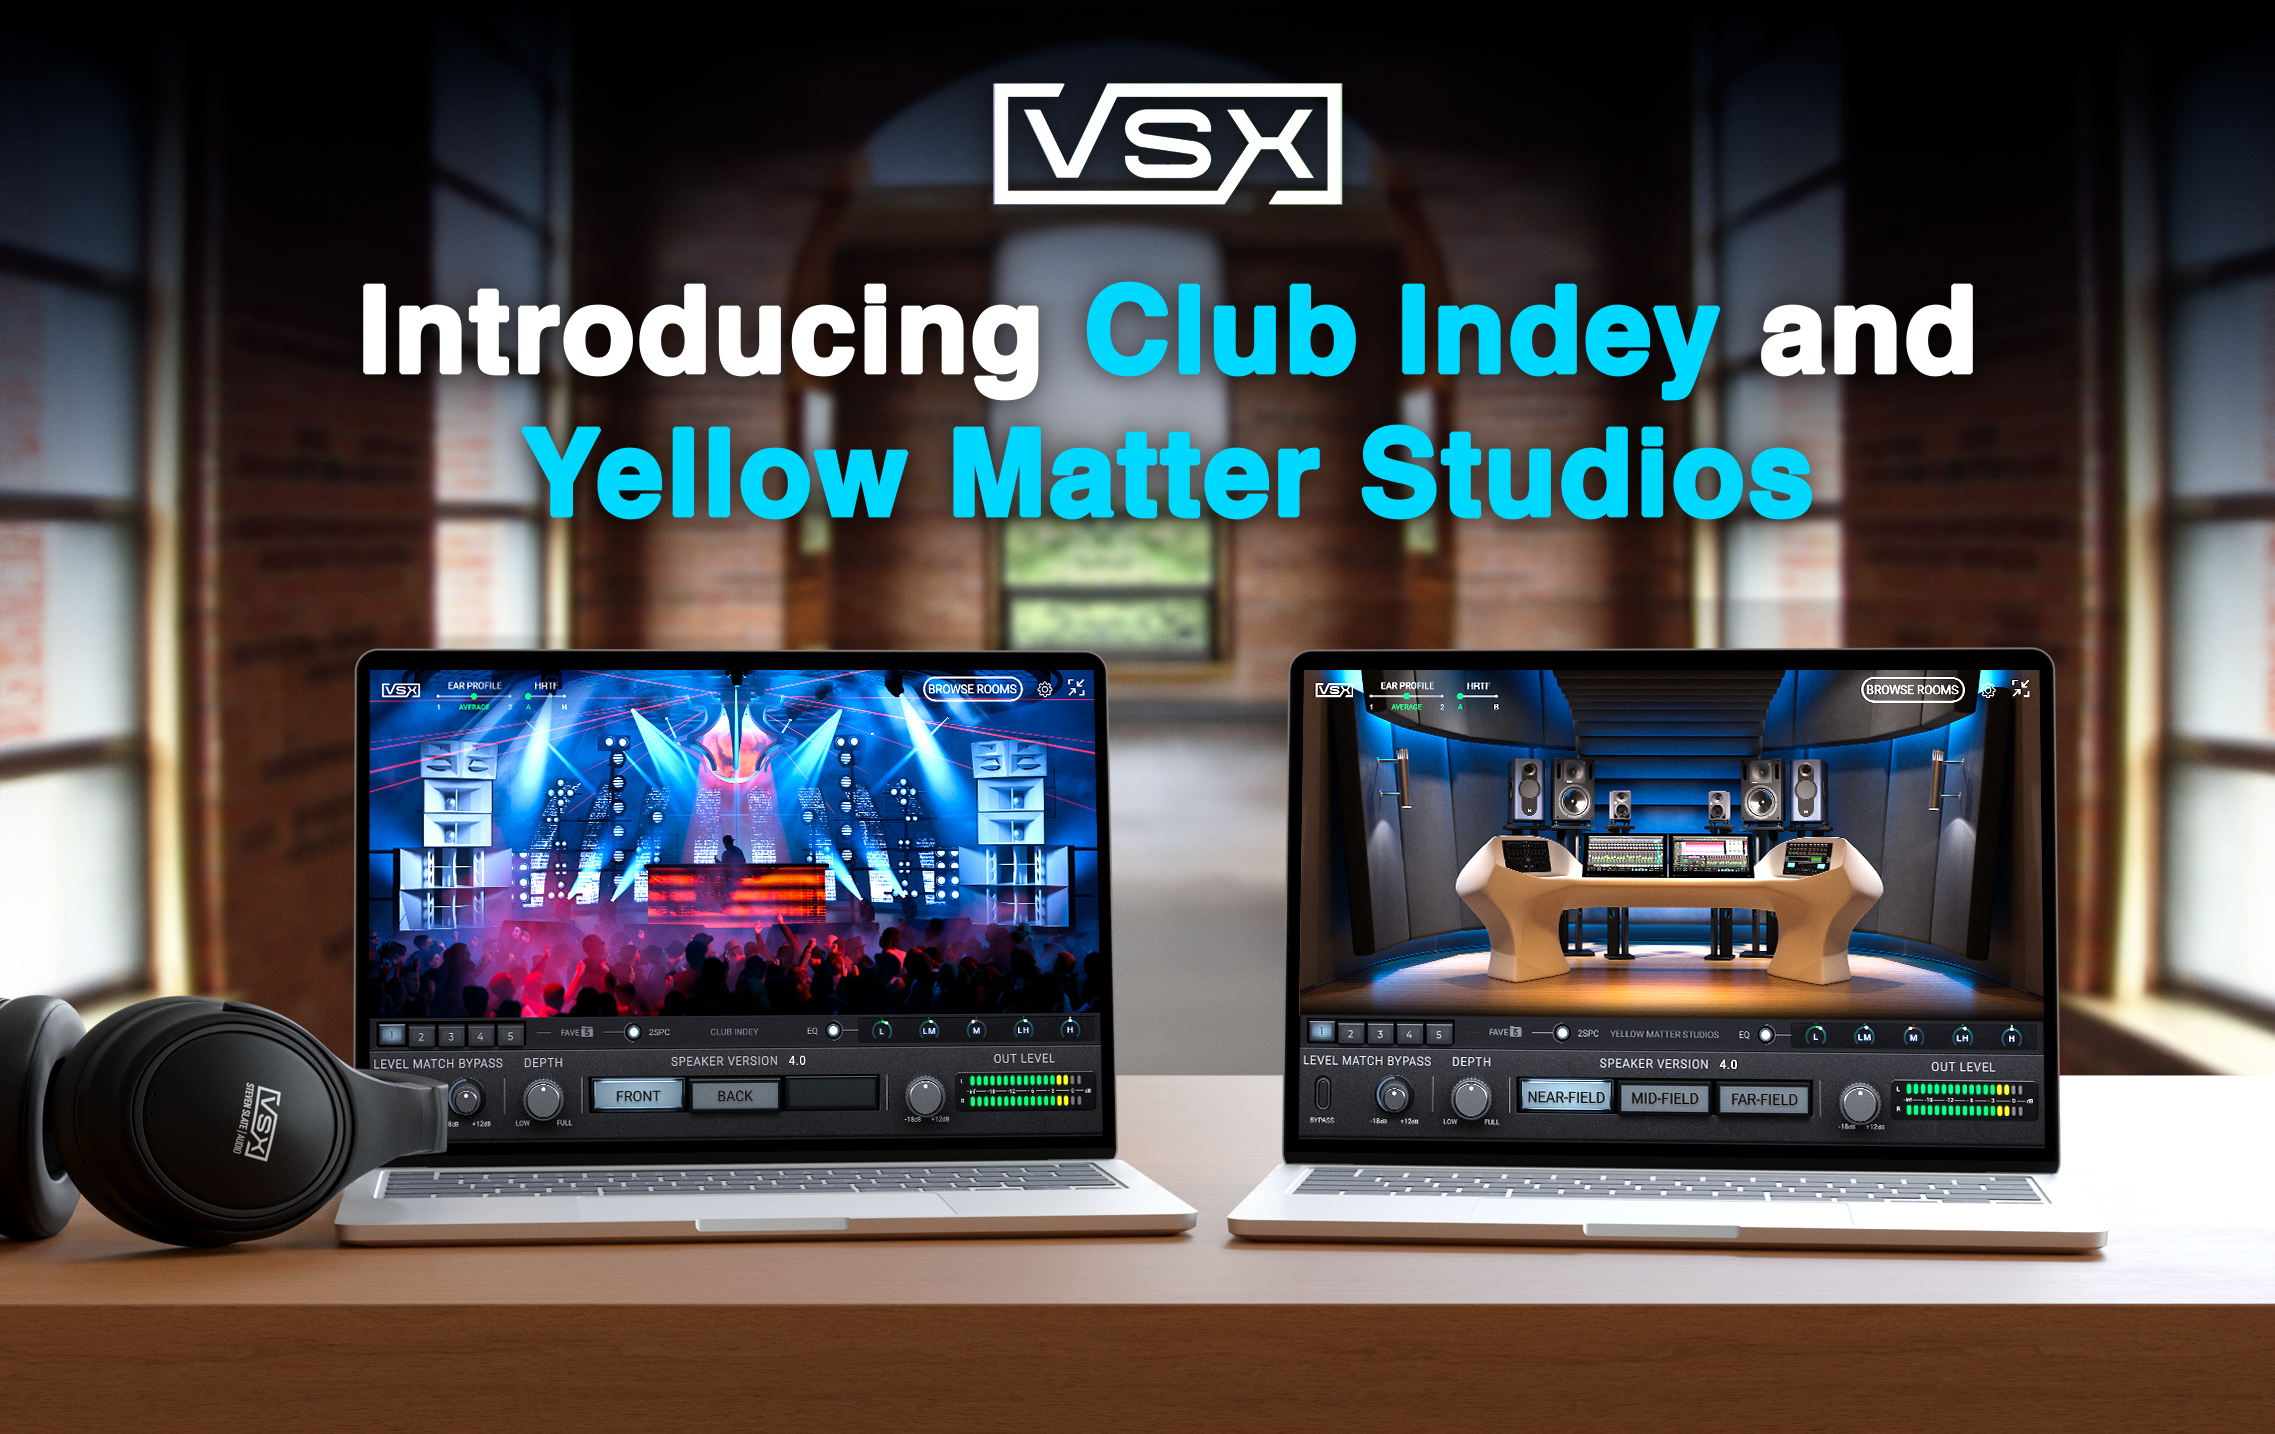 Fatter lows. Crispy highs. Crystal-clear mids. Once you mix in Club Indey and Yellow Matter Studios, you'll never go back to mixing without them. And best of all, these two new rooms are 100% FREE to VSX Platinum owners!